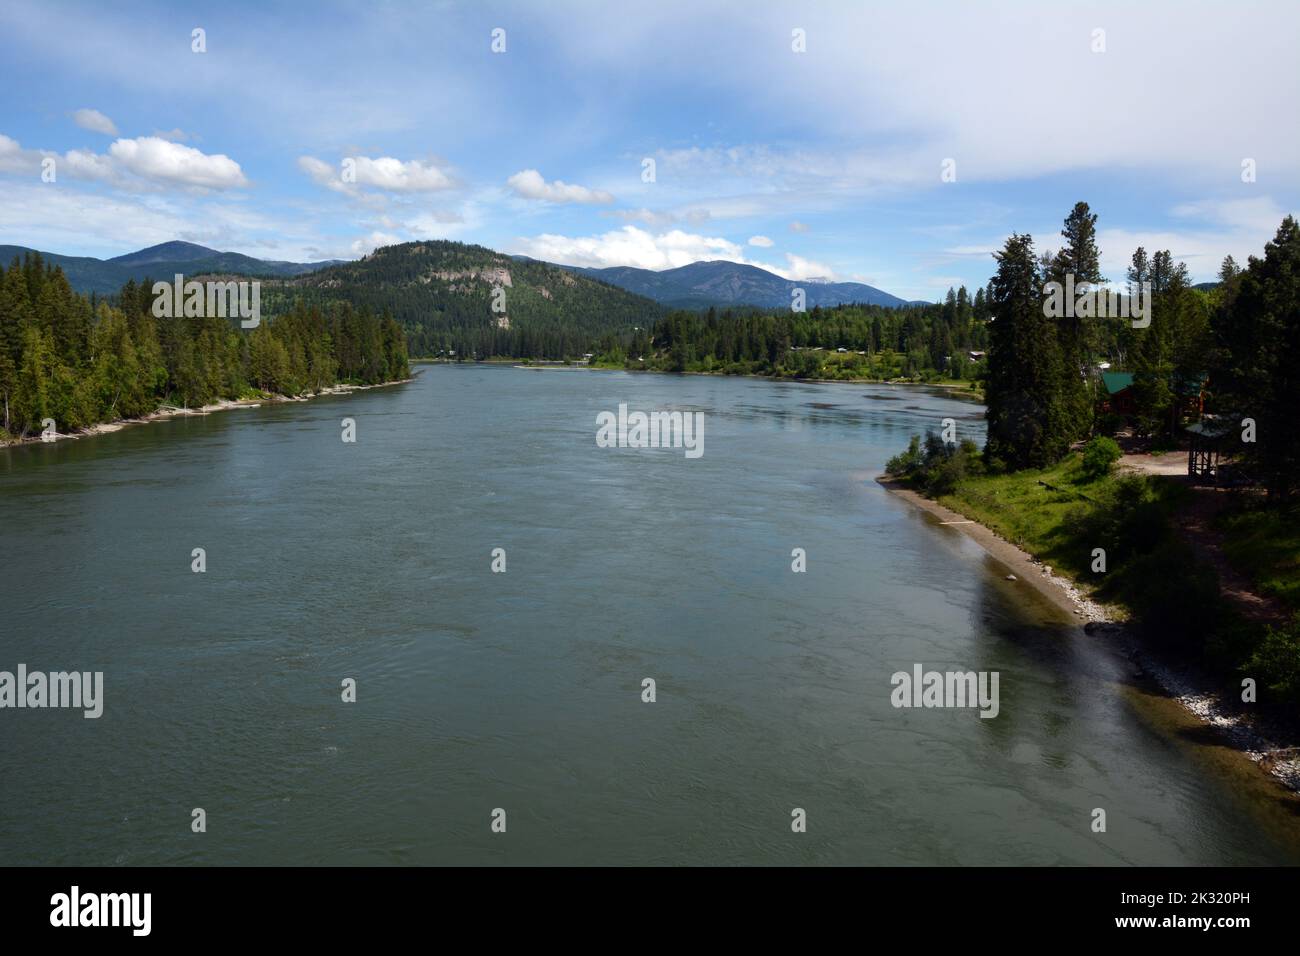 The Pend-Oreille River, a tributary of the Columbia, running through the Colville National Forest near Ione, in northeastern Washington State, USA. Stock Photo